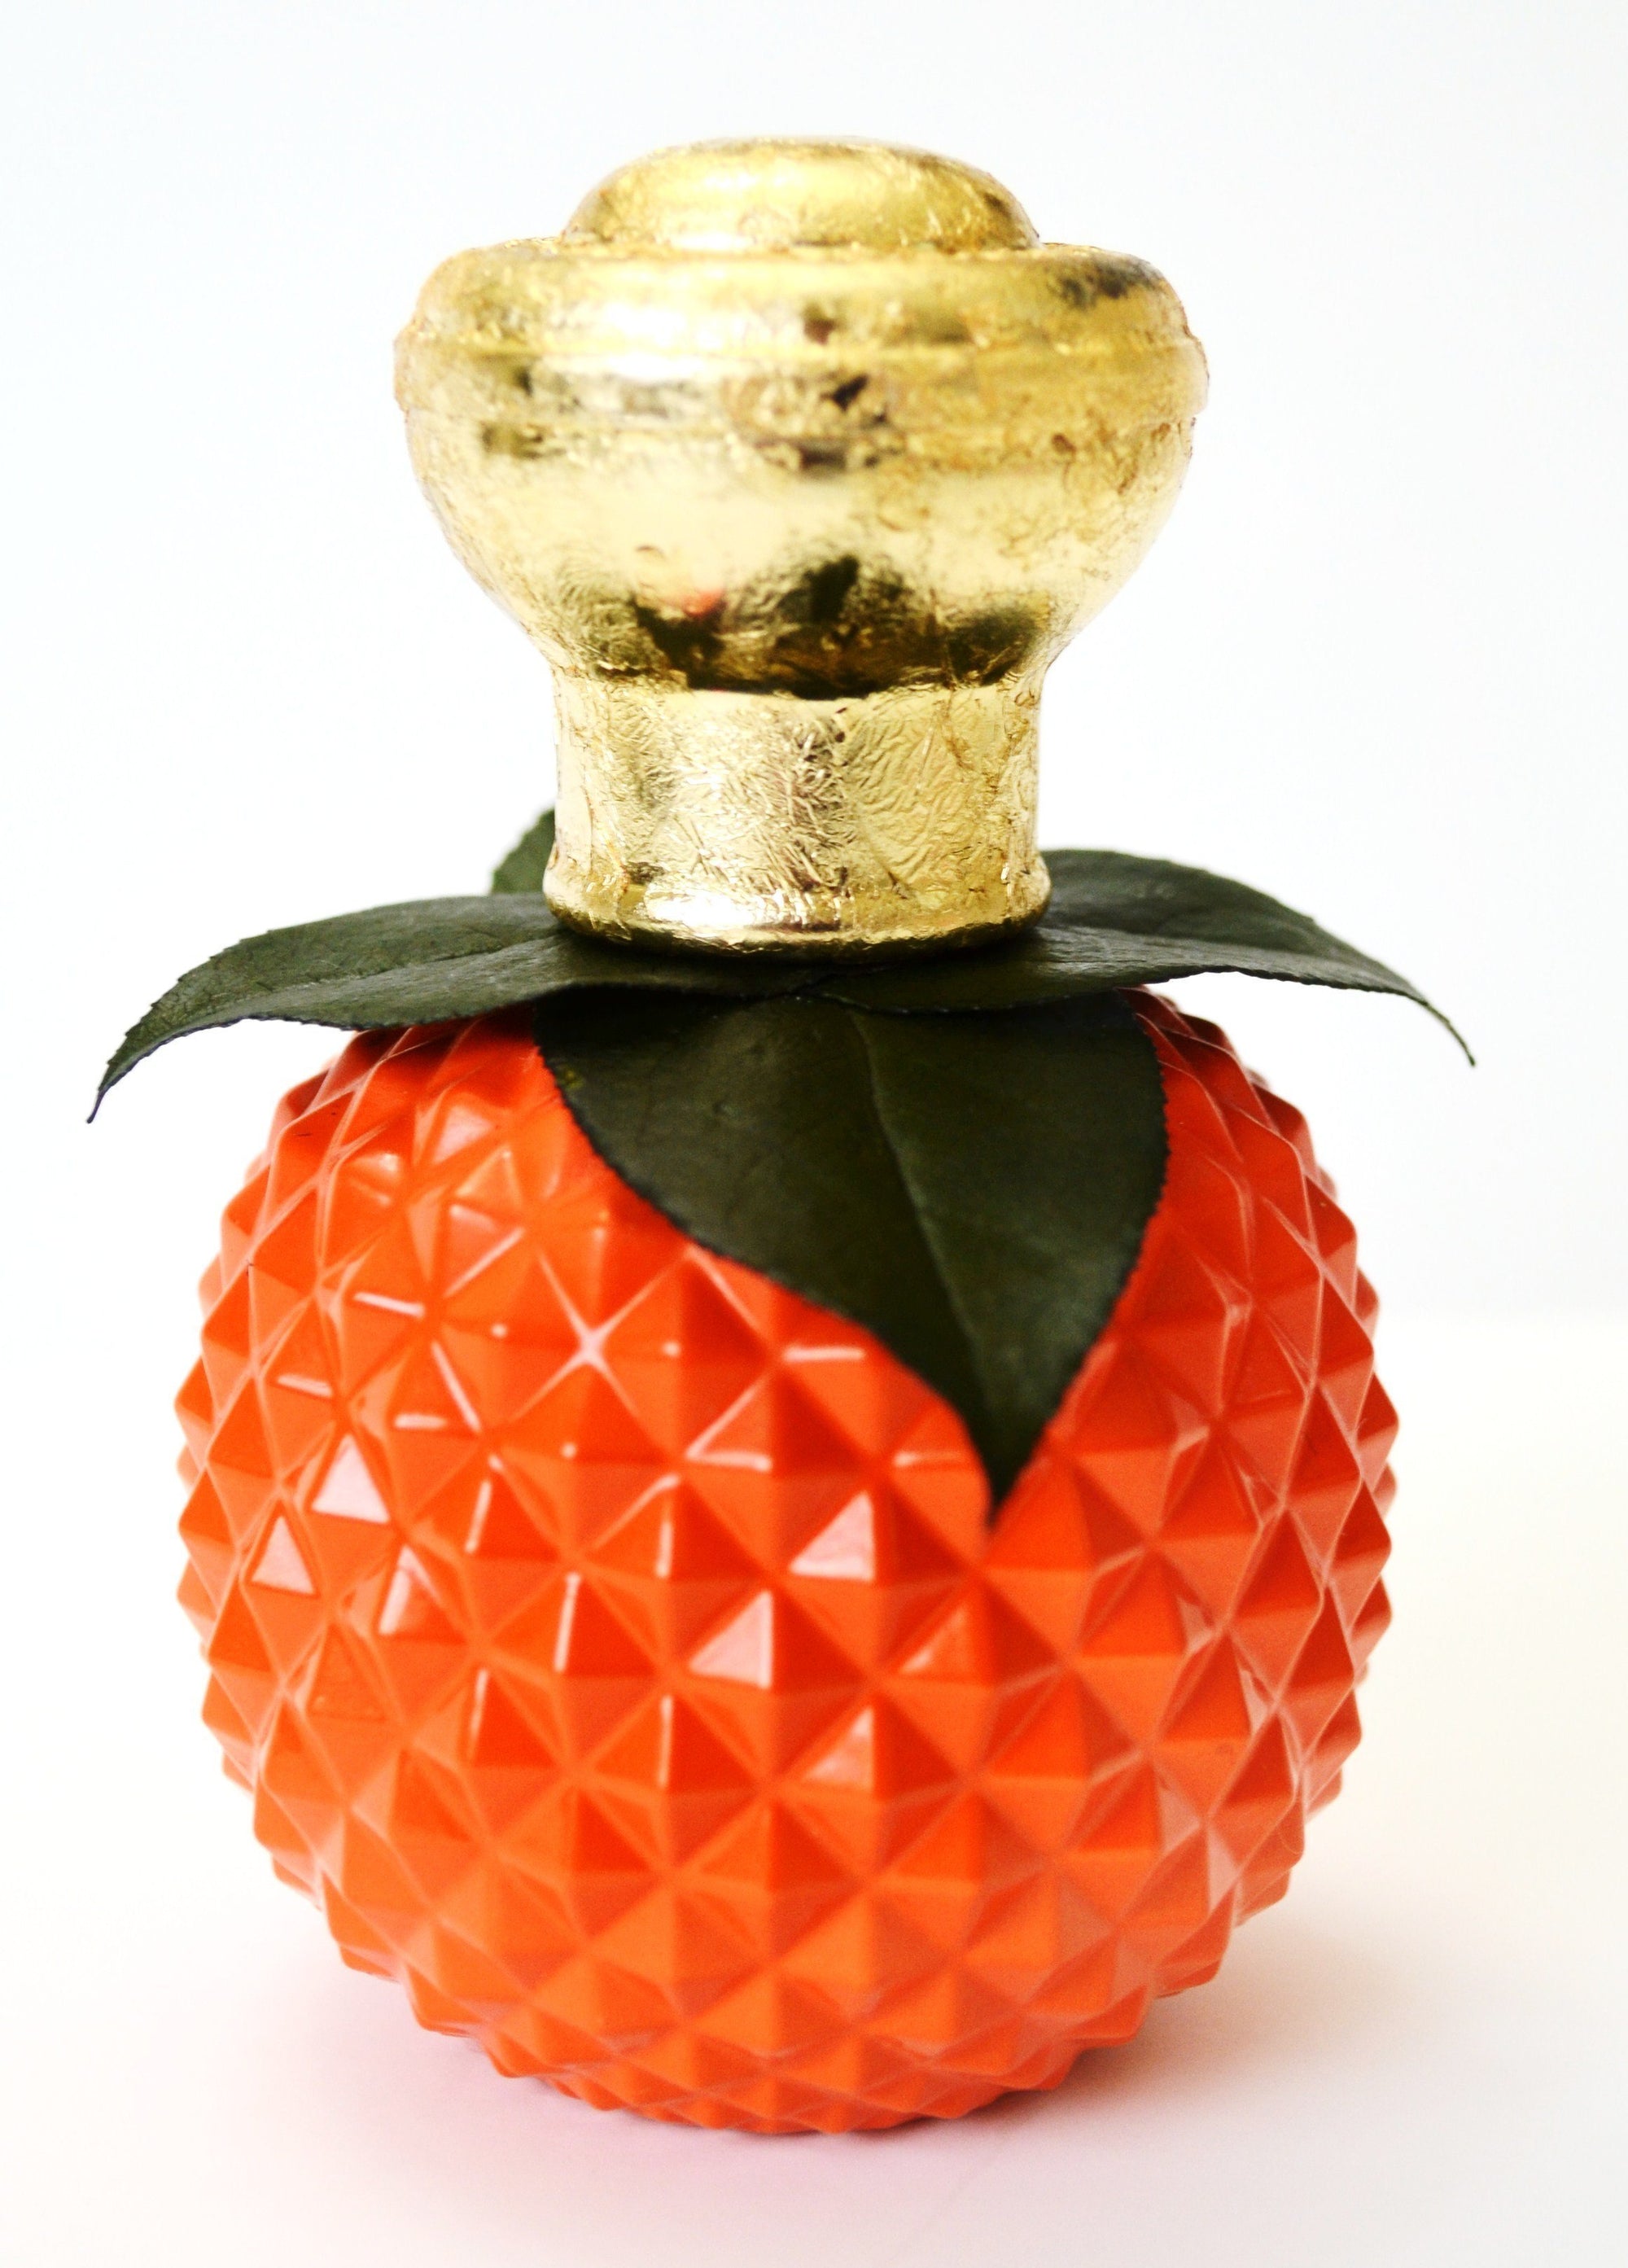 oM Artisan Perfume: Smoky resins, agarwood and the entire orange tree from leaf to fruit